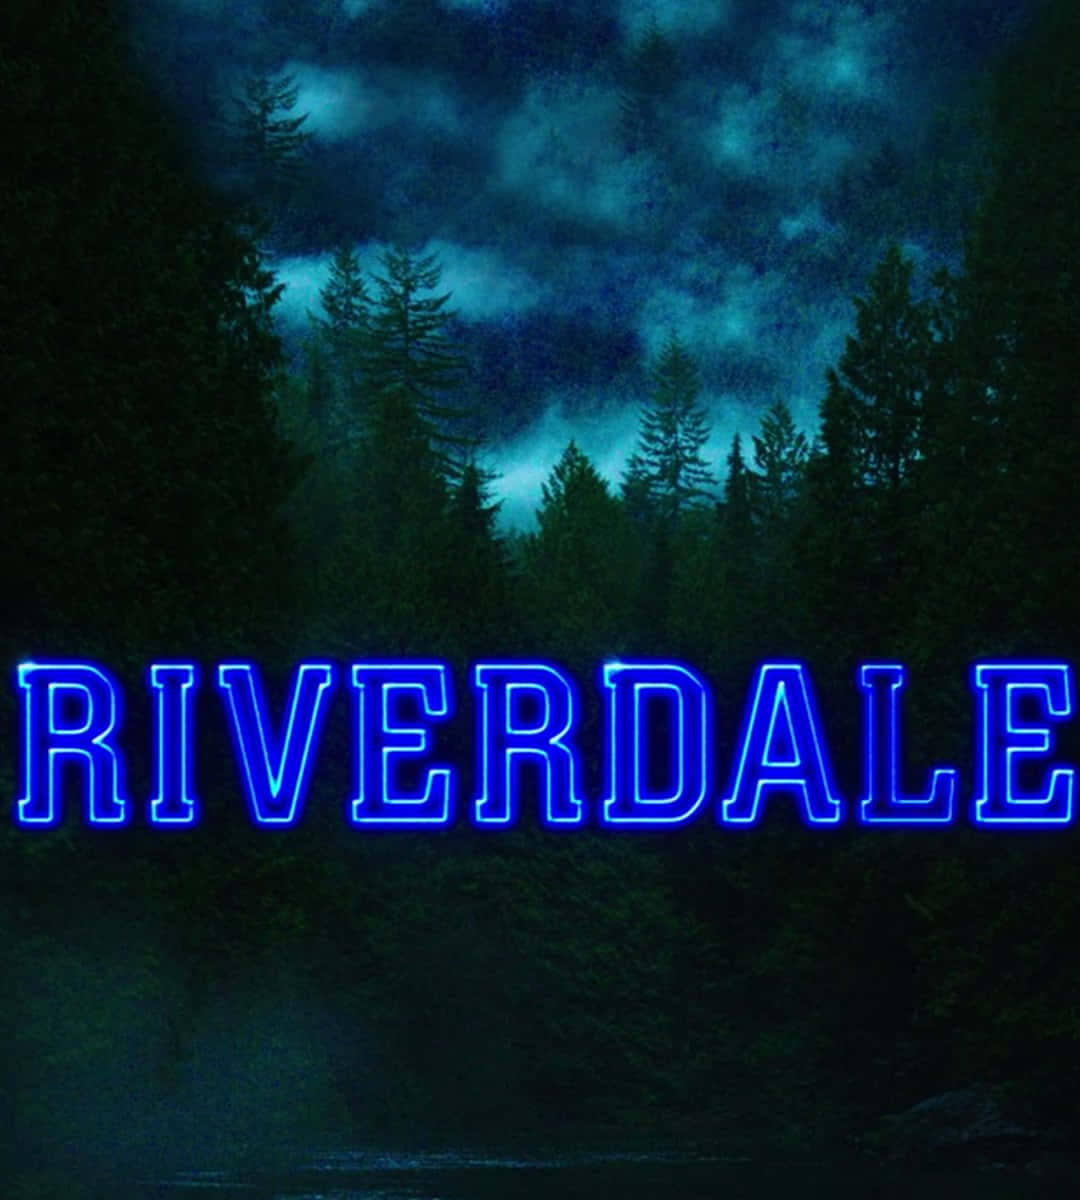 Riverdale - a mysterious adventure in the town of secrets